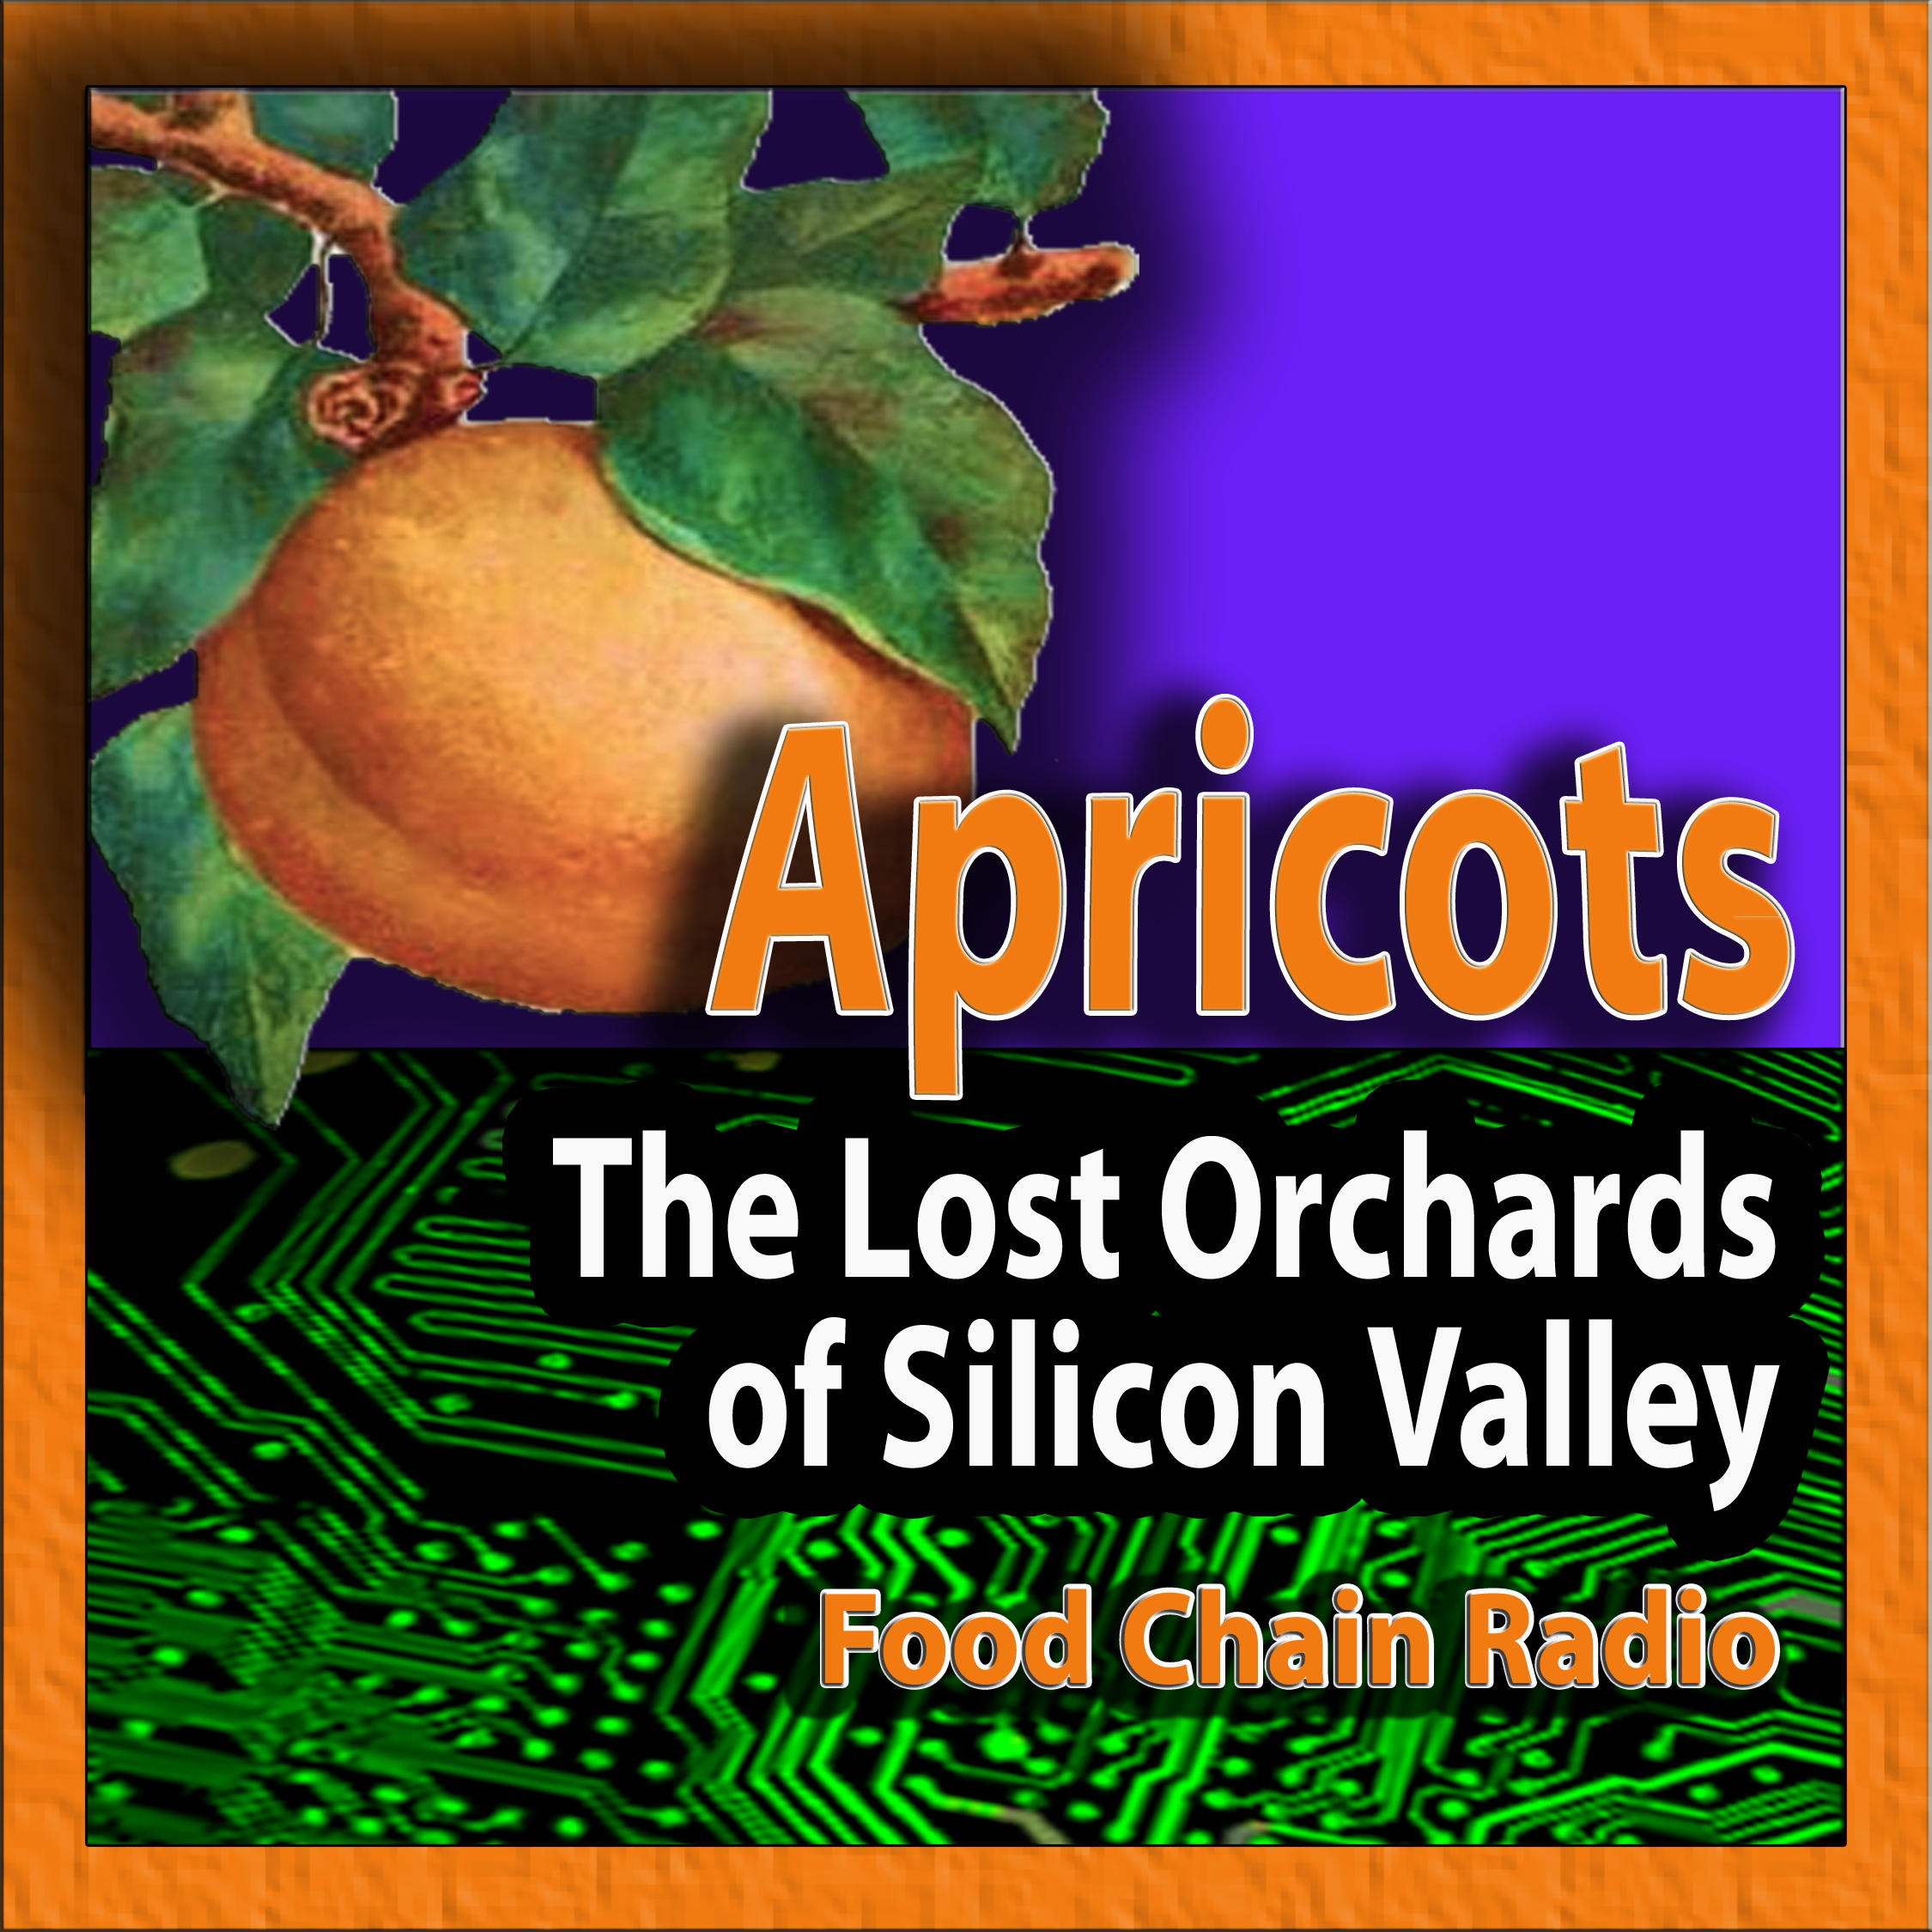 Michael Olson Food Chain Radio: From Apricots to Apple Inc